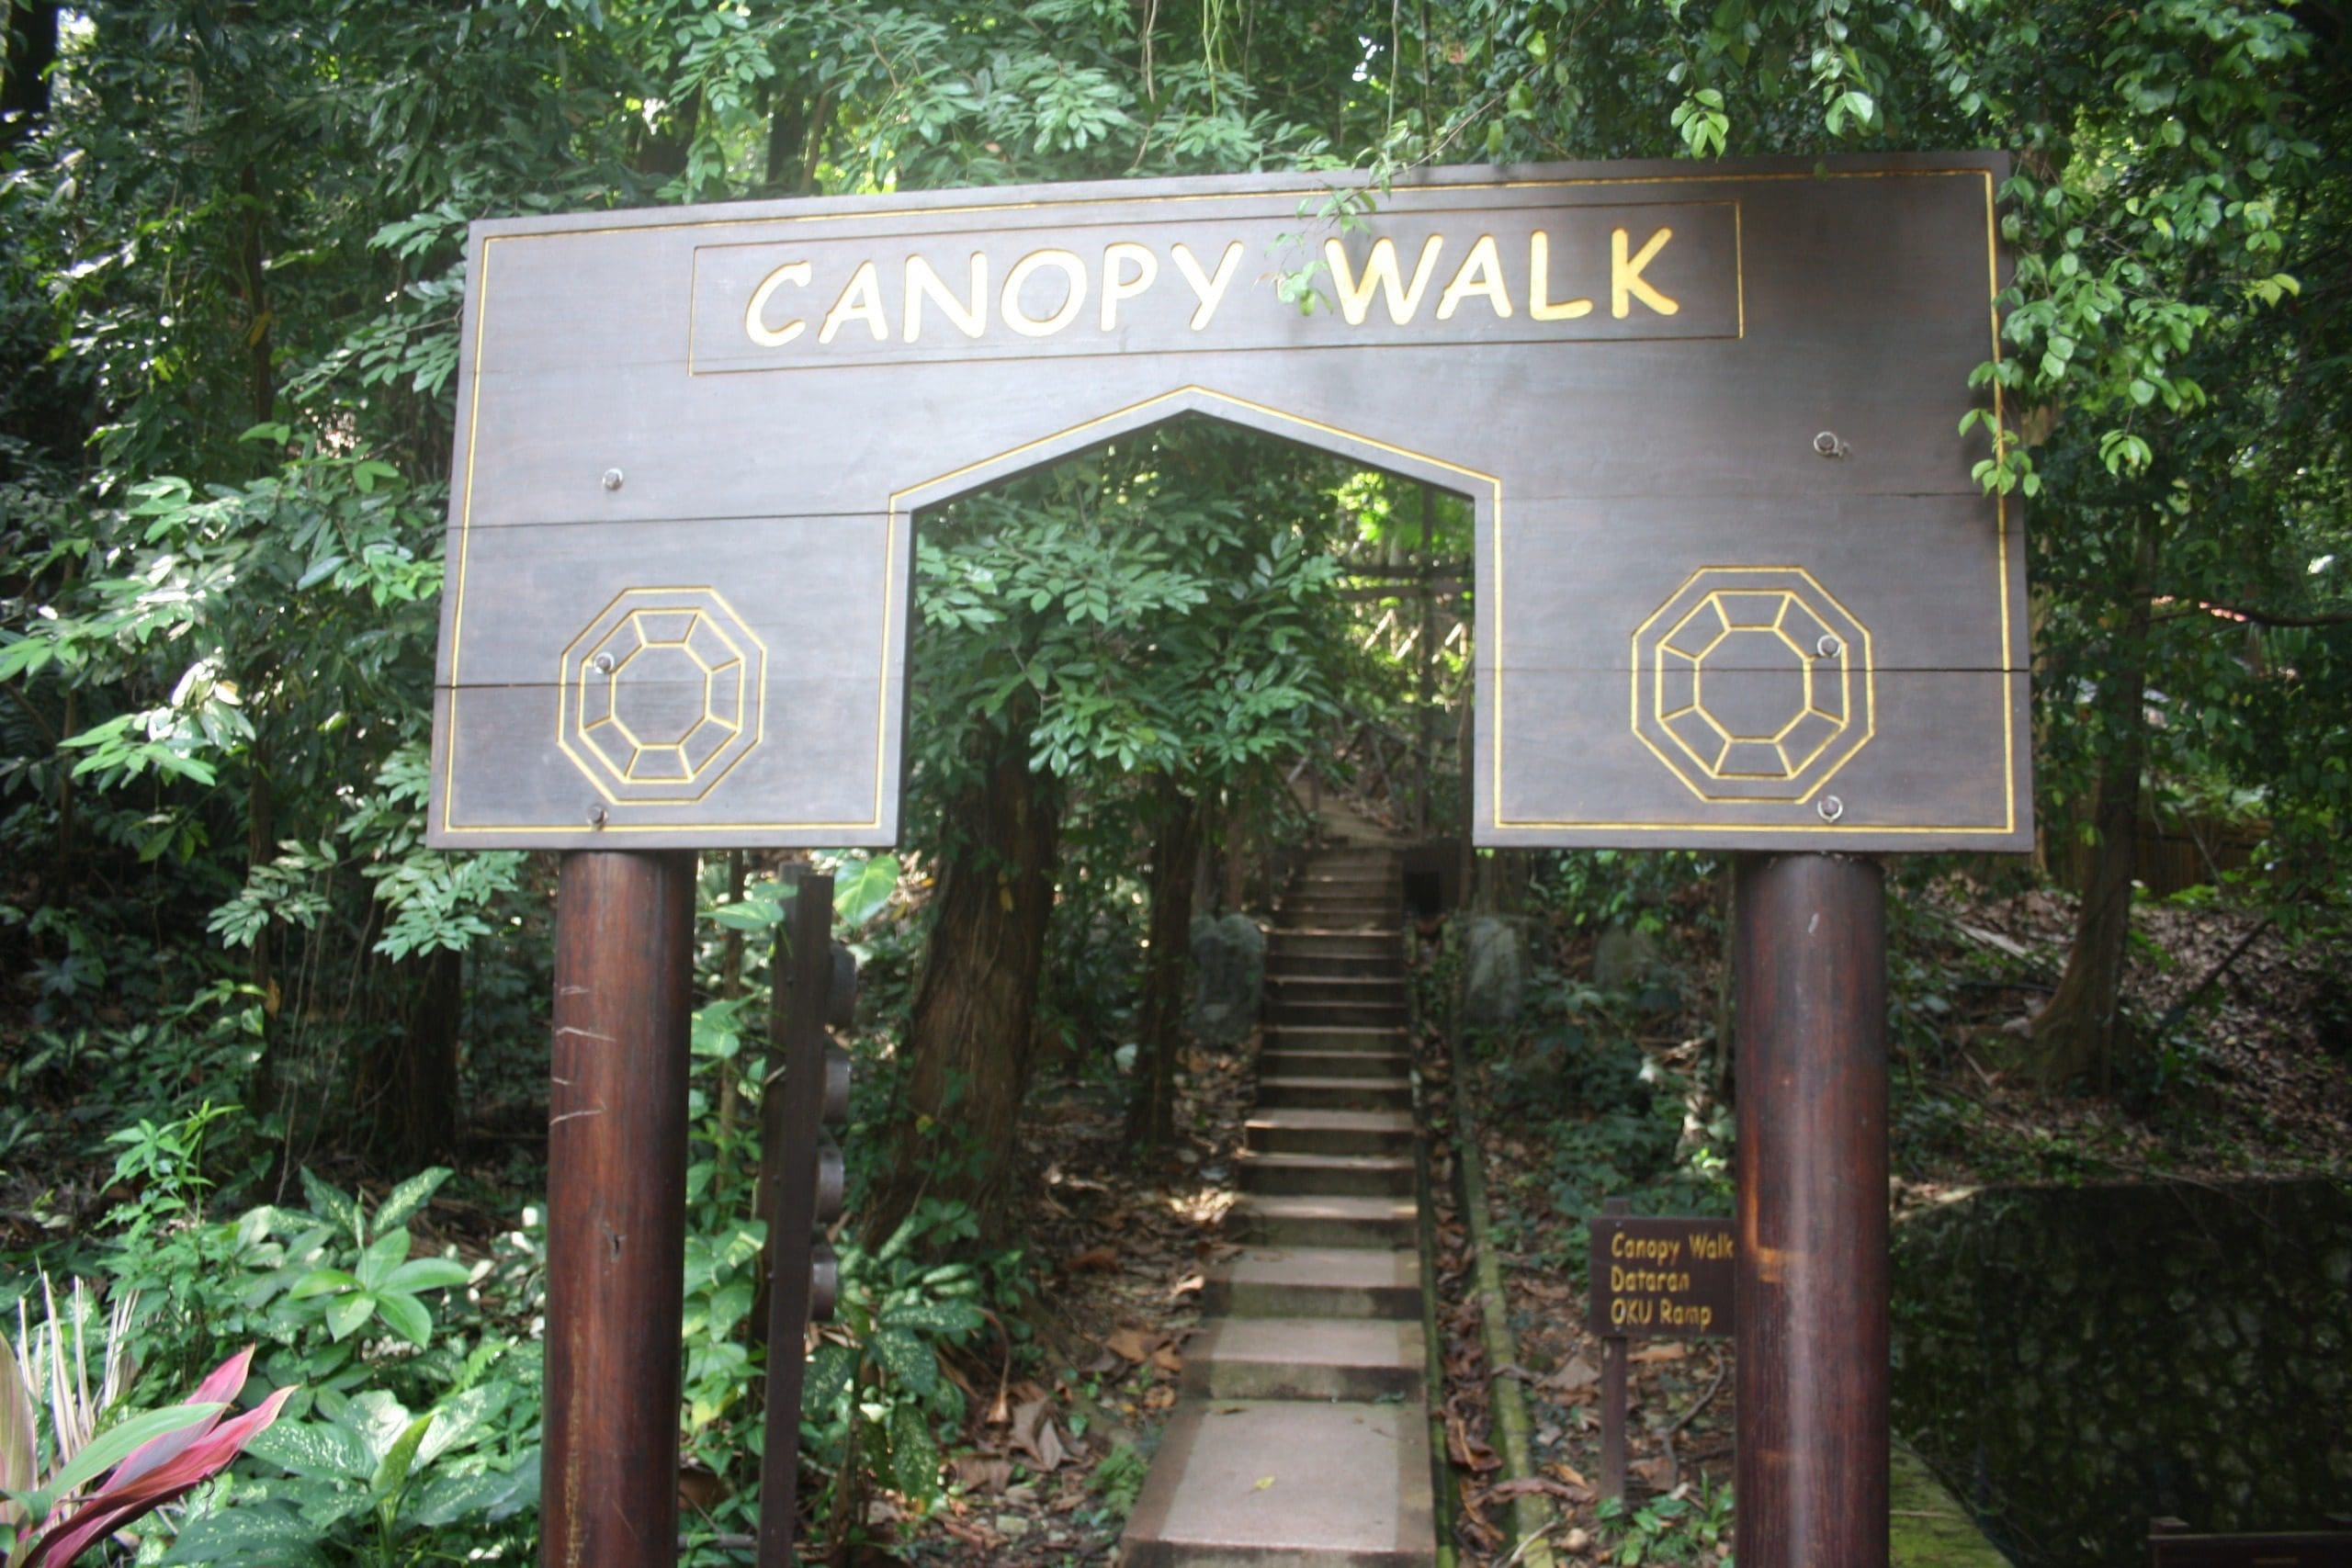 The entrance to the Canopy Walk in the KL Eco Park